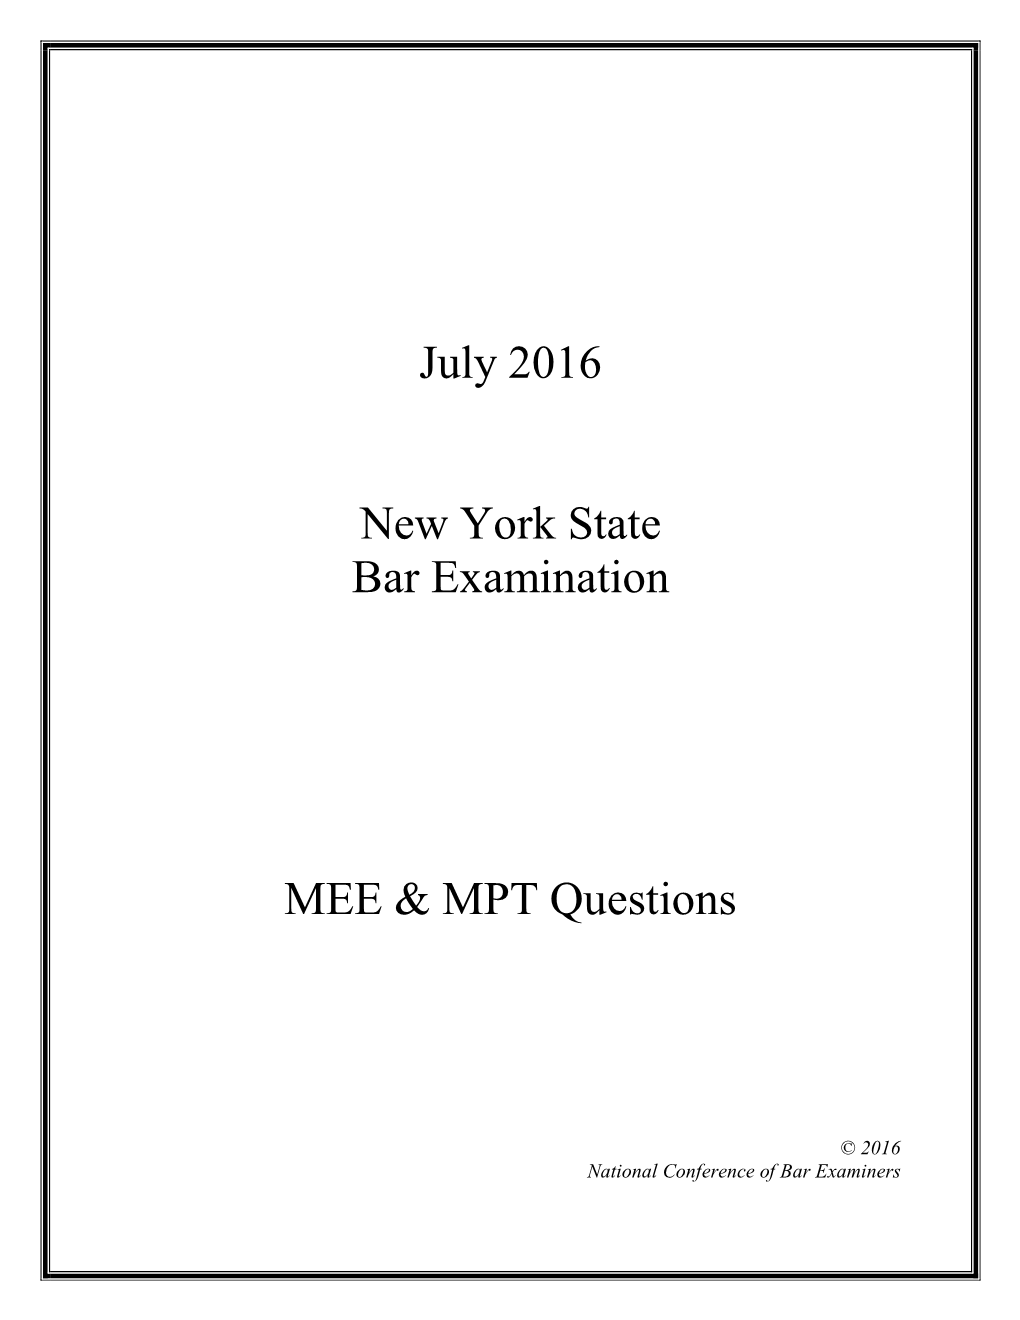 July 2016 New York State Bar Examination MEE & MPT Questions